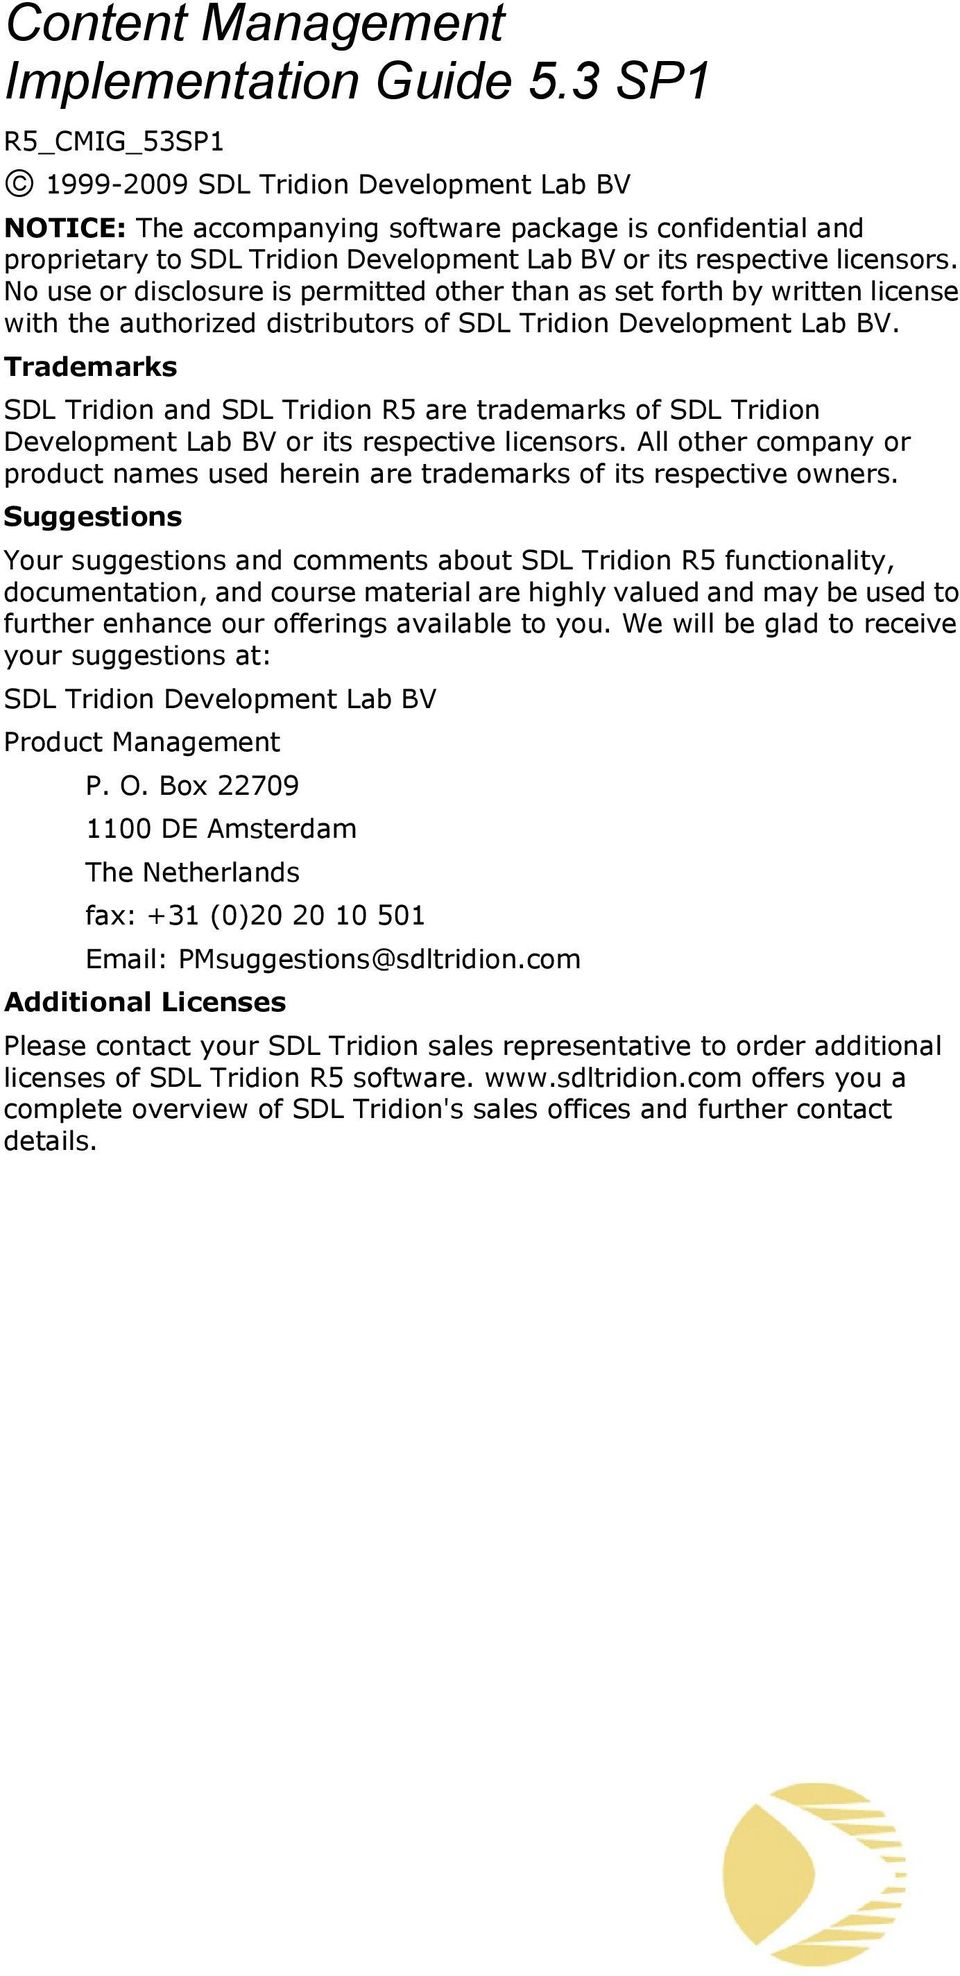 No use or disclosure is permitted other than as set forth by written license with the authorized distributors of SDL Tridion Development Lab BV.